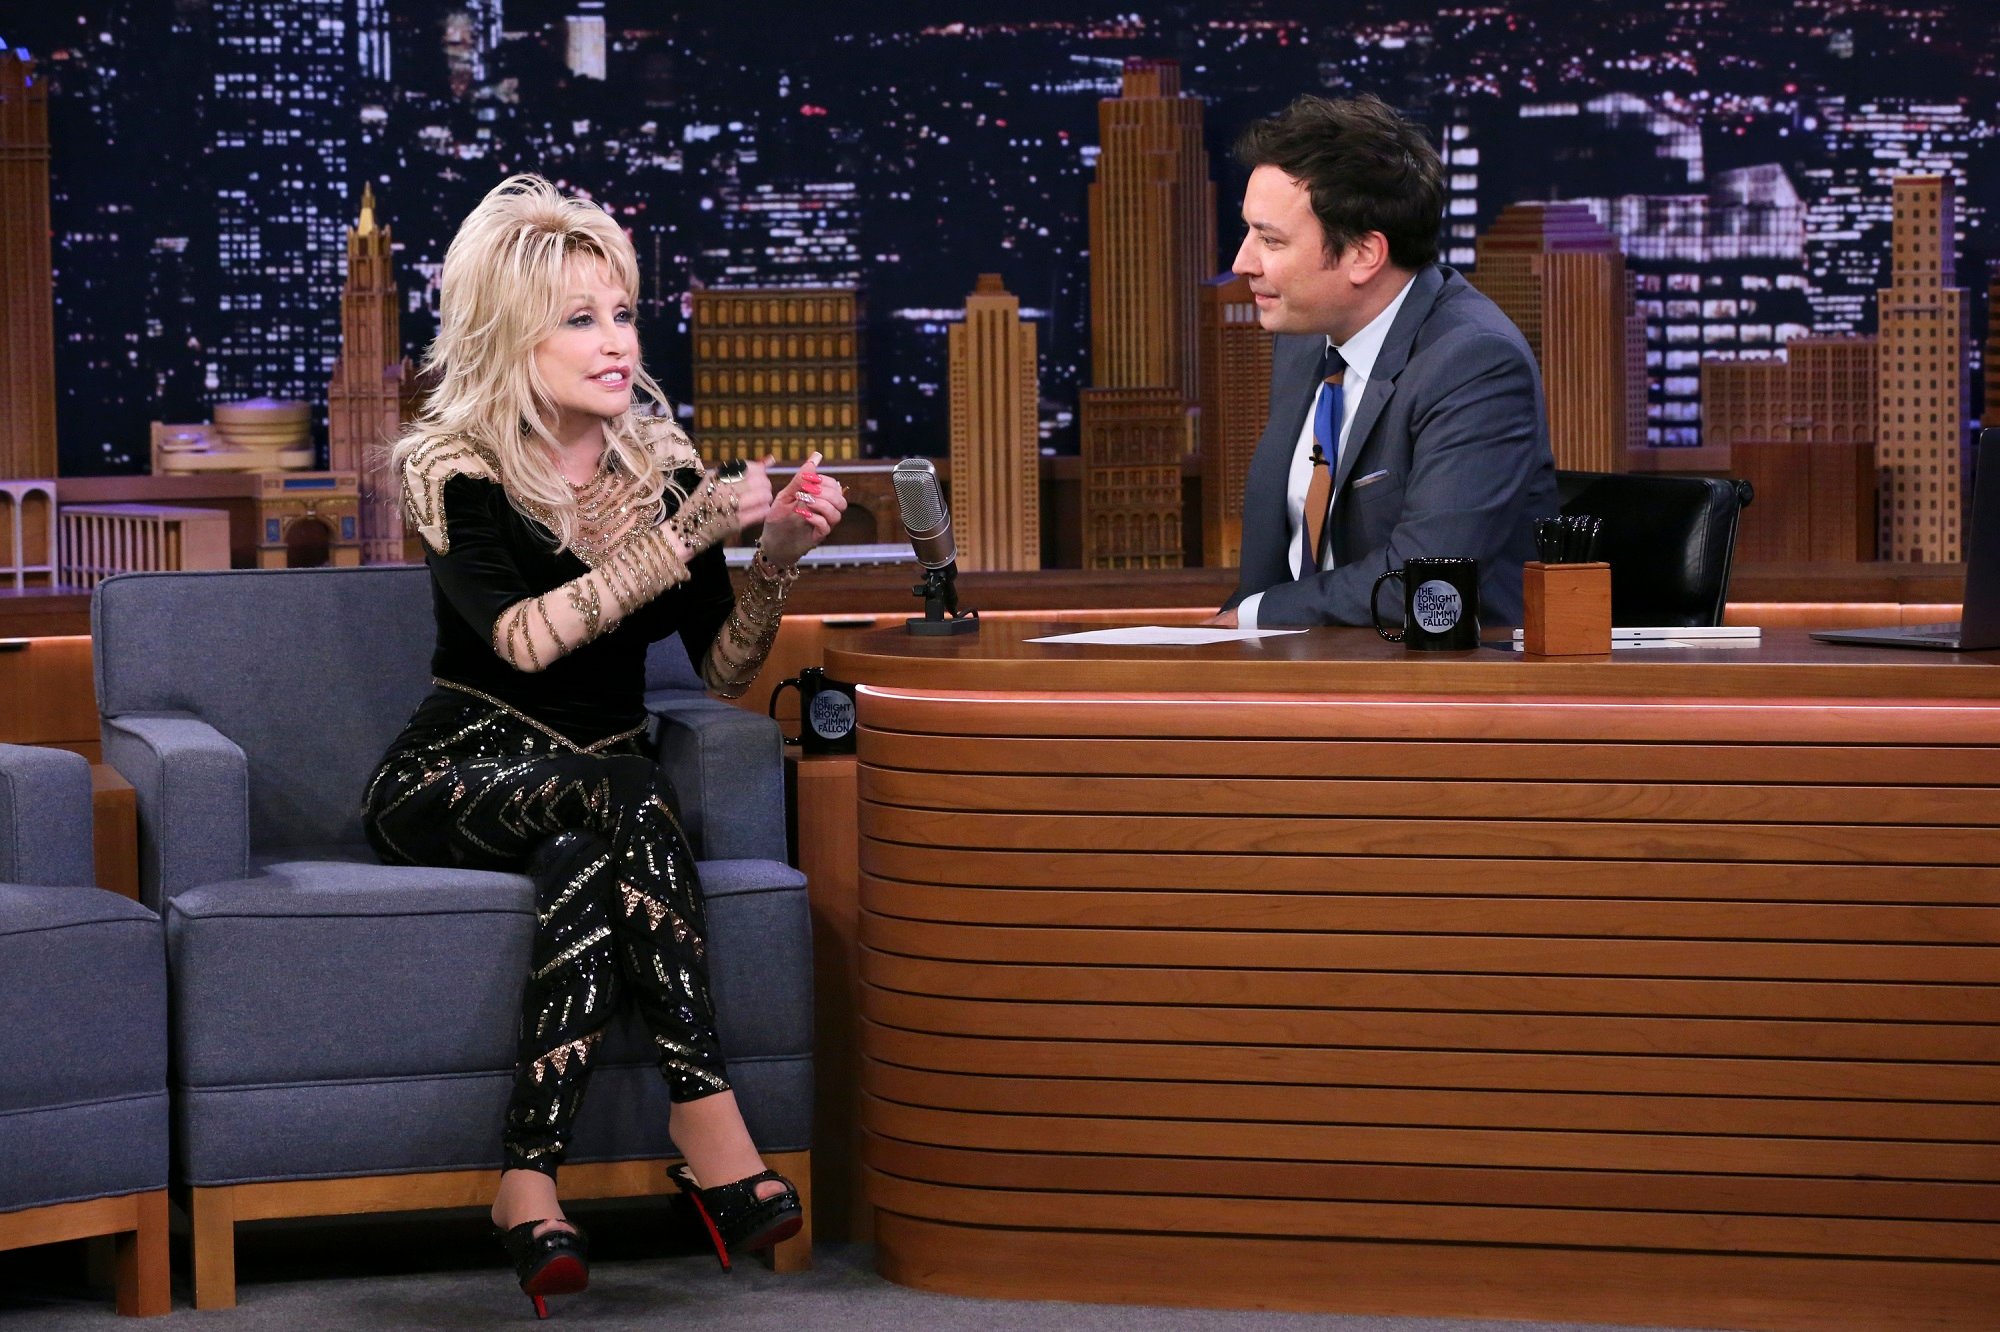 Dolly Parton sits on a gray chair and talks to Jimmy Fallon who is sitting behind a desk